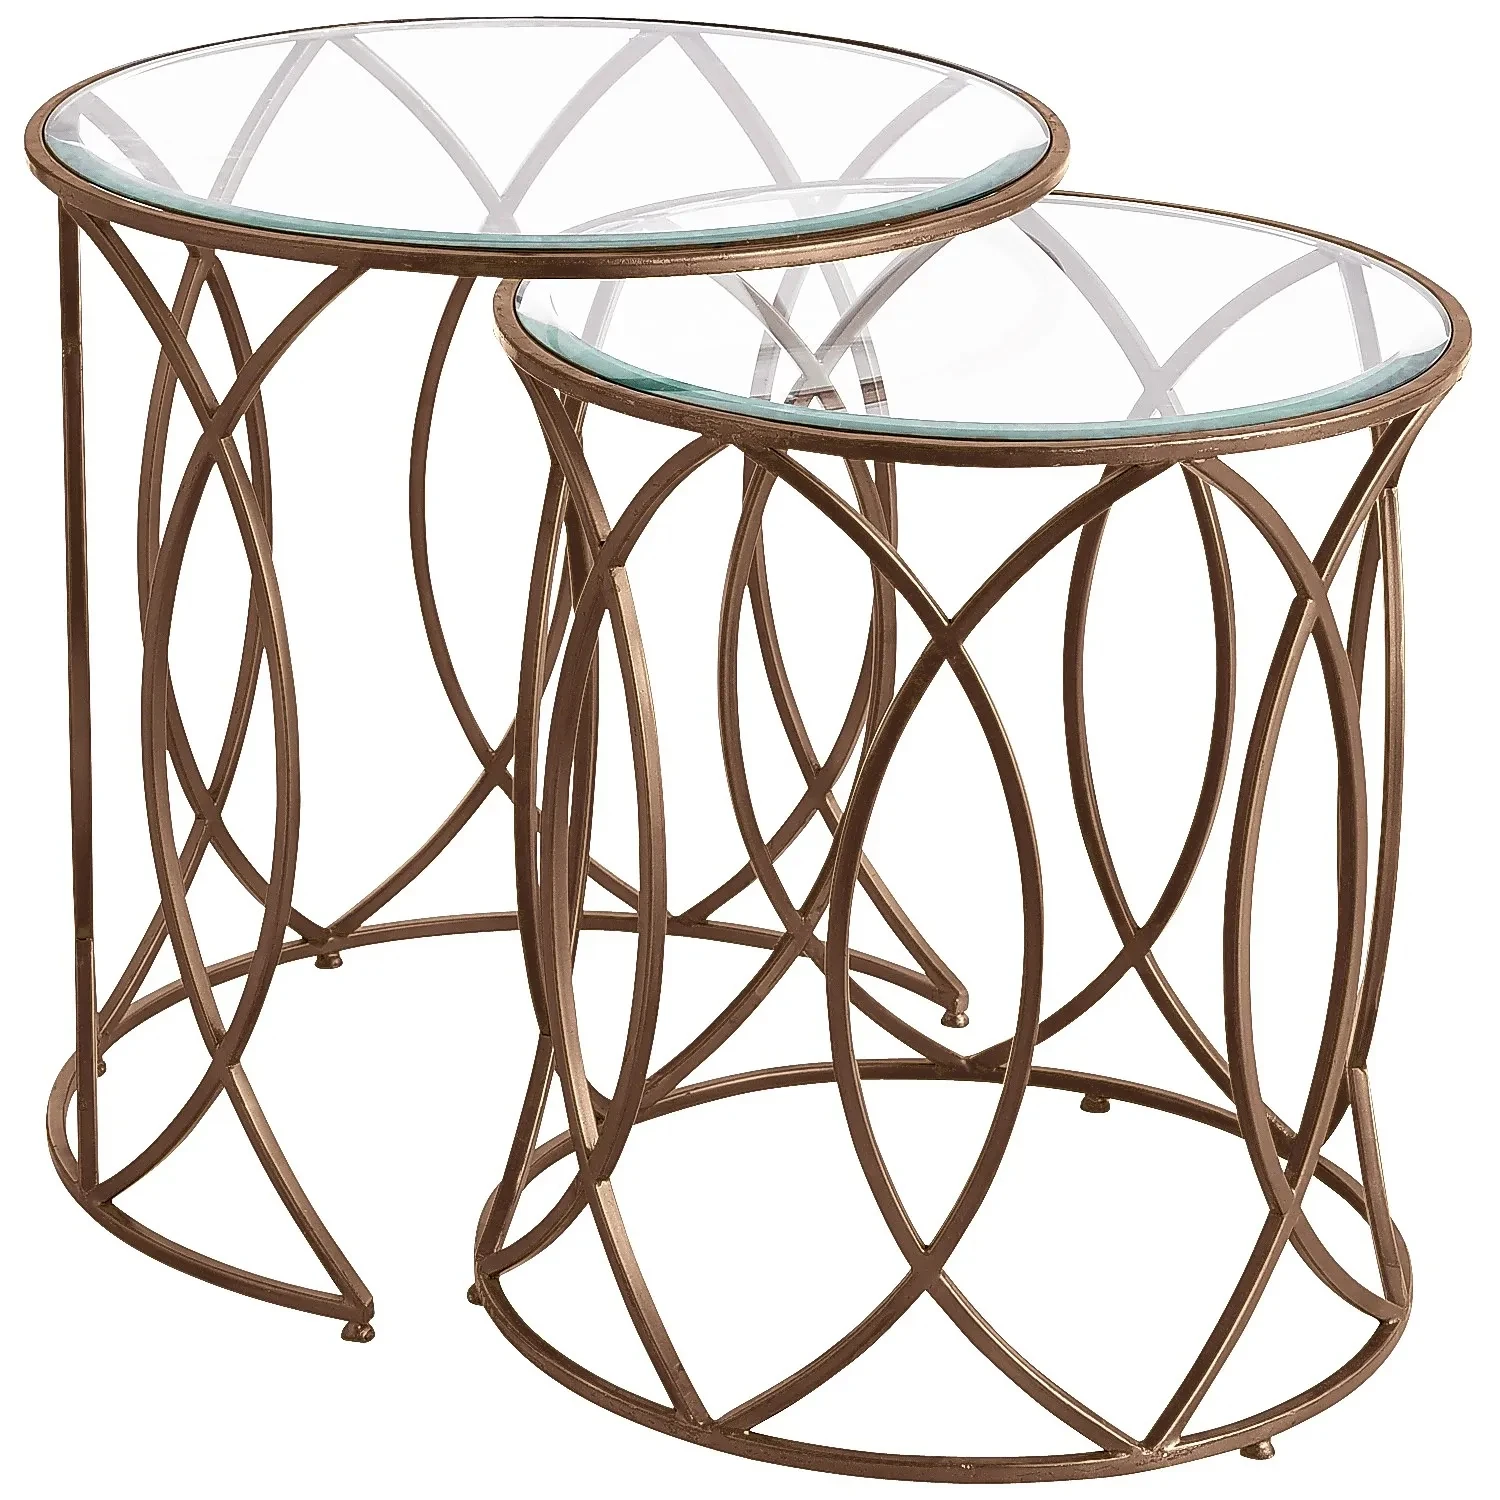 Swt Modern Round Antique Gold Nesting Glass Top Metal Side Coffee Table End Table For Bedside And Living Room Furniture Buy Glass Top Coffee Side Tables Nesting Metal Side Tables Modern Bedside Tabls